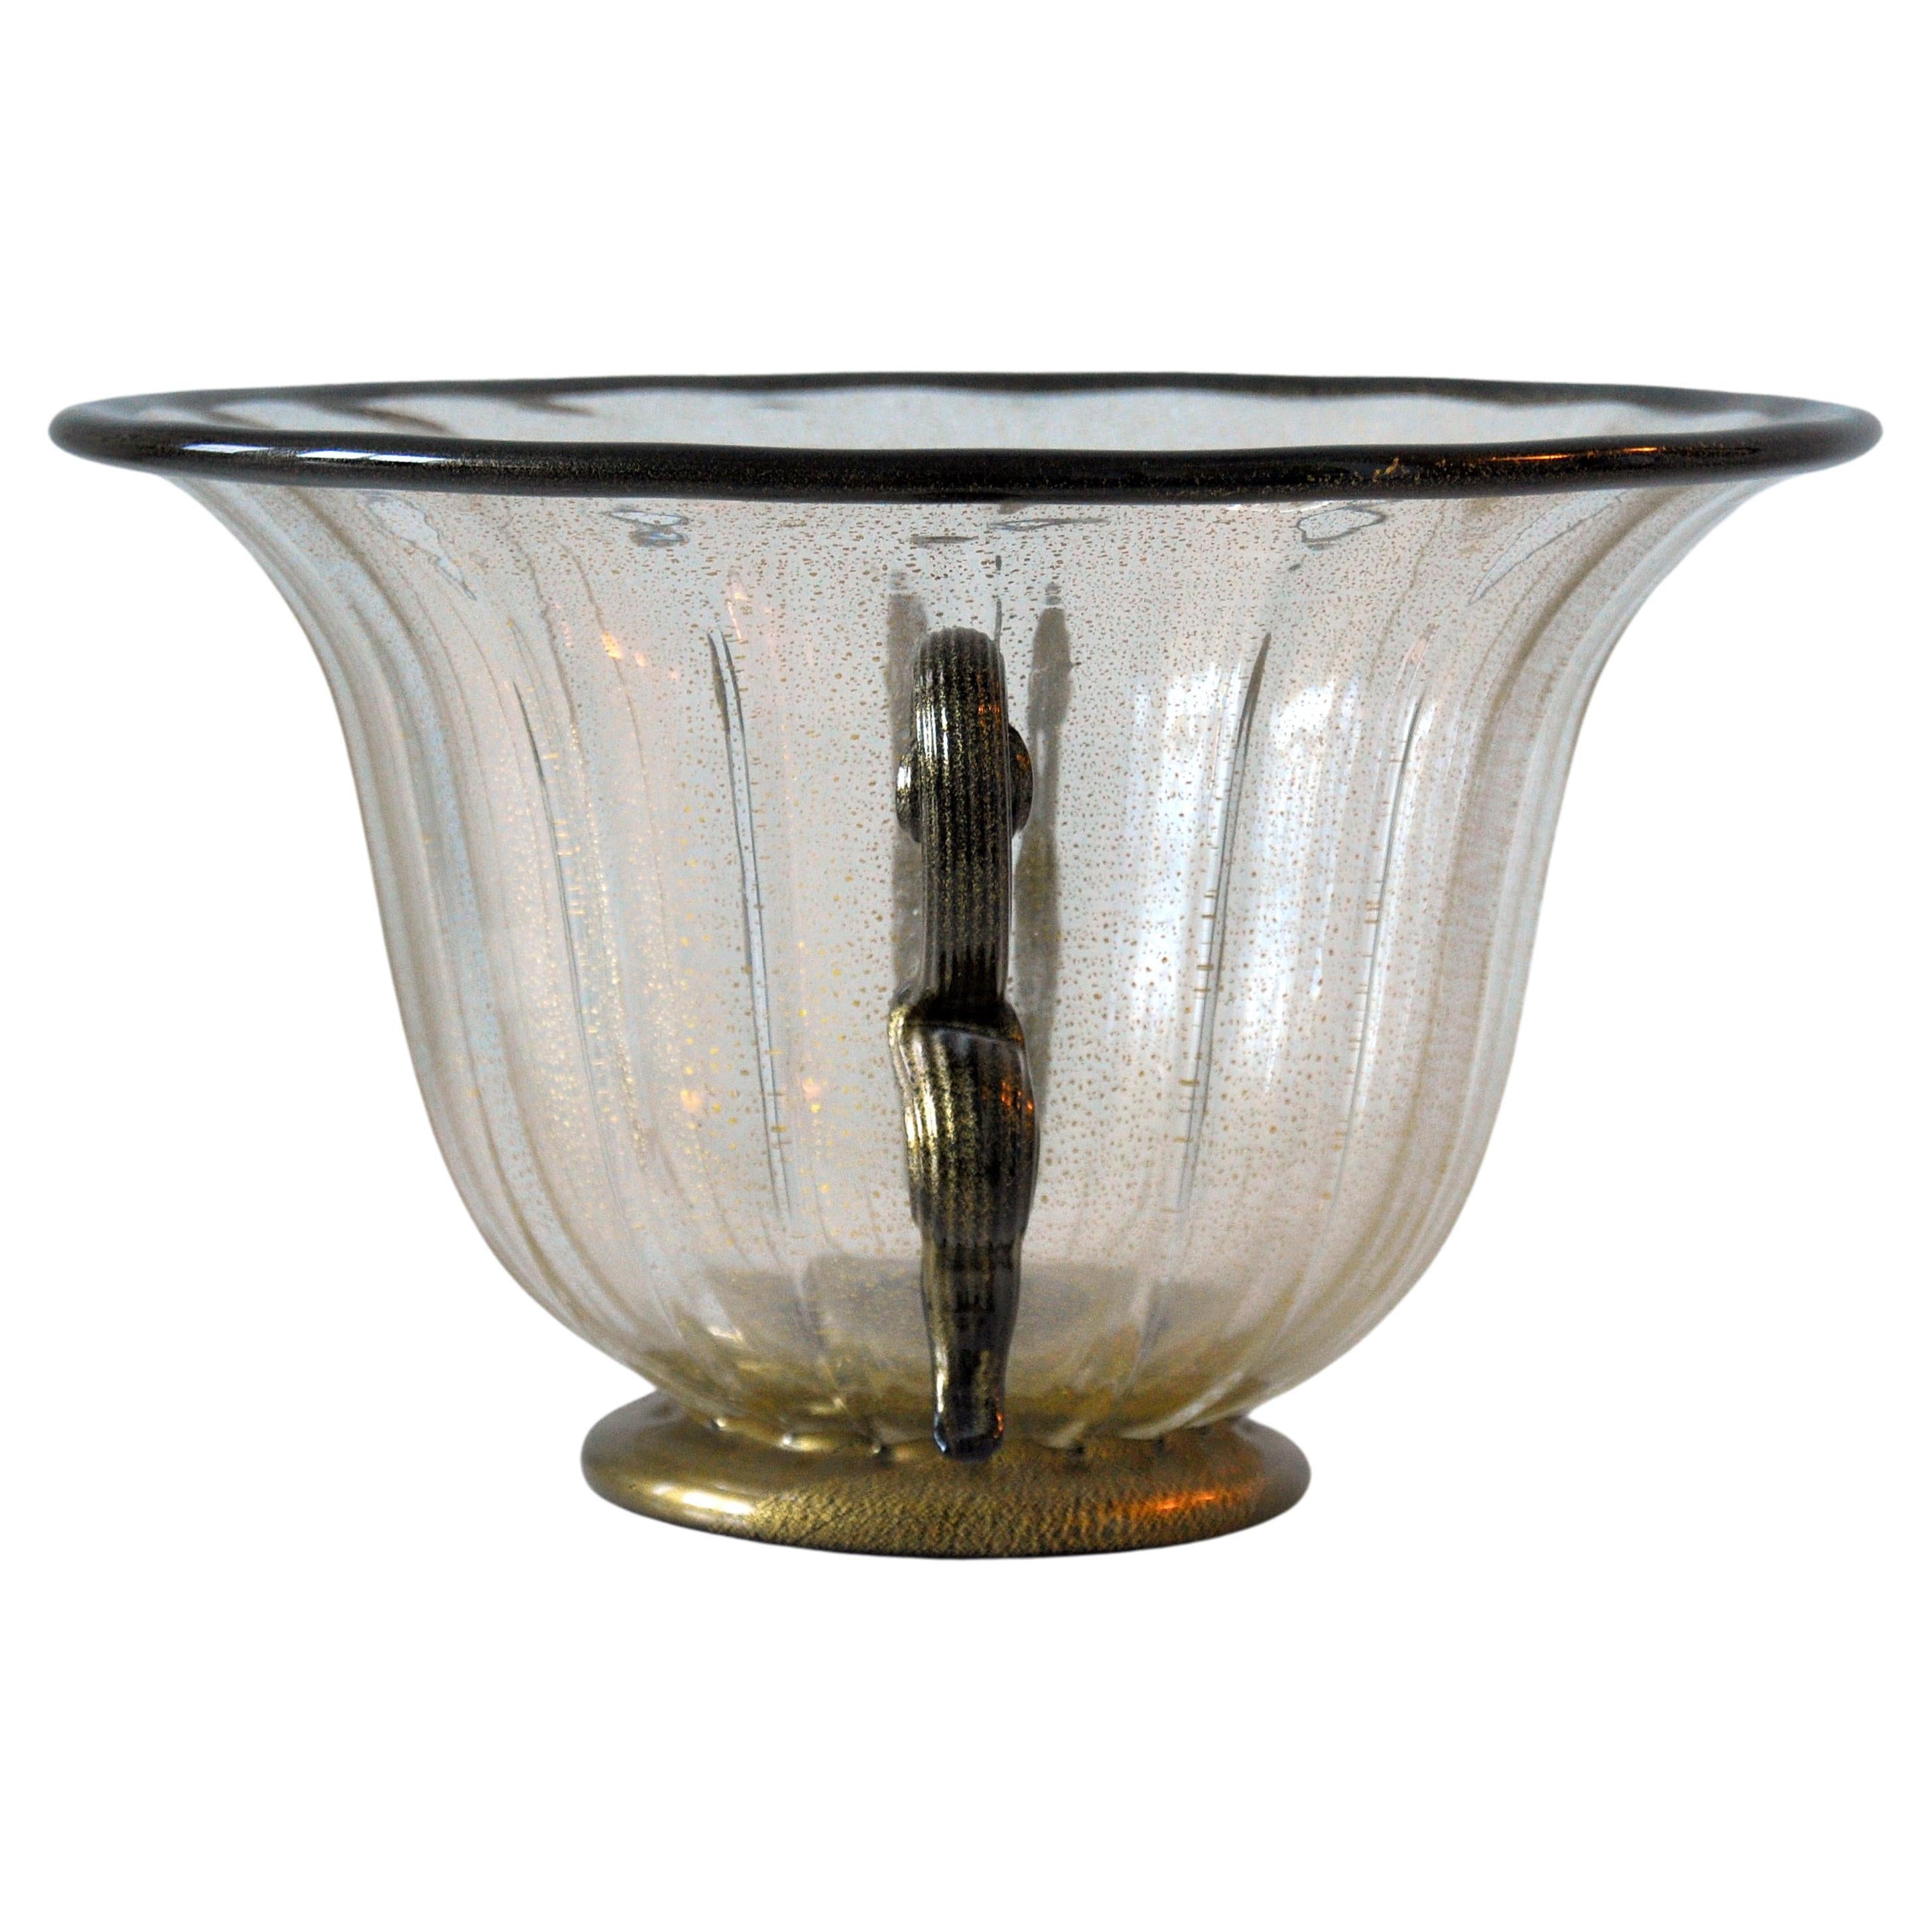 Art Deco Gold and Black Murano Glass Centerpiece Bowl with Serpent Handles For Sale 4